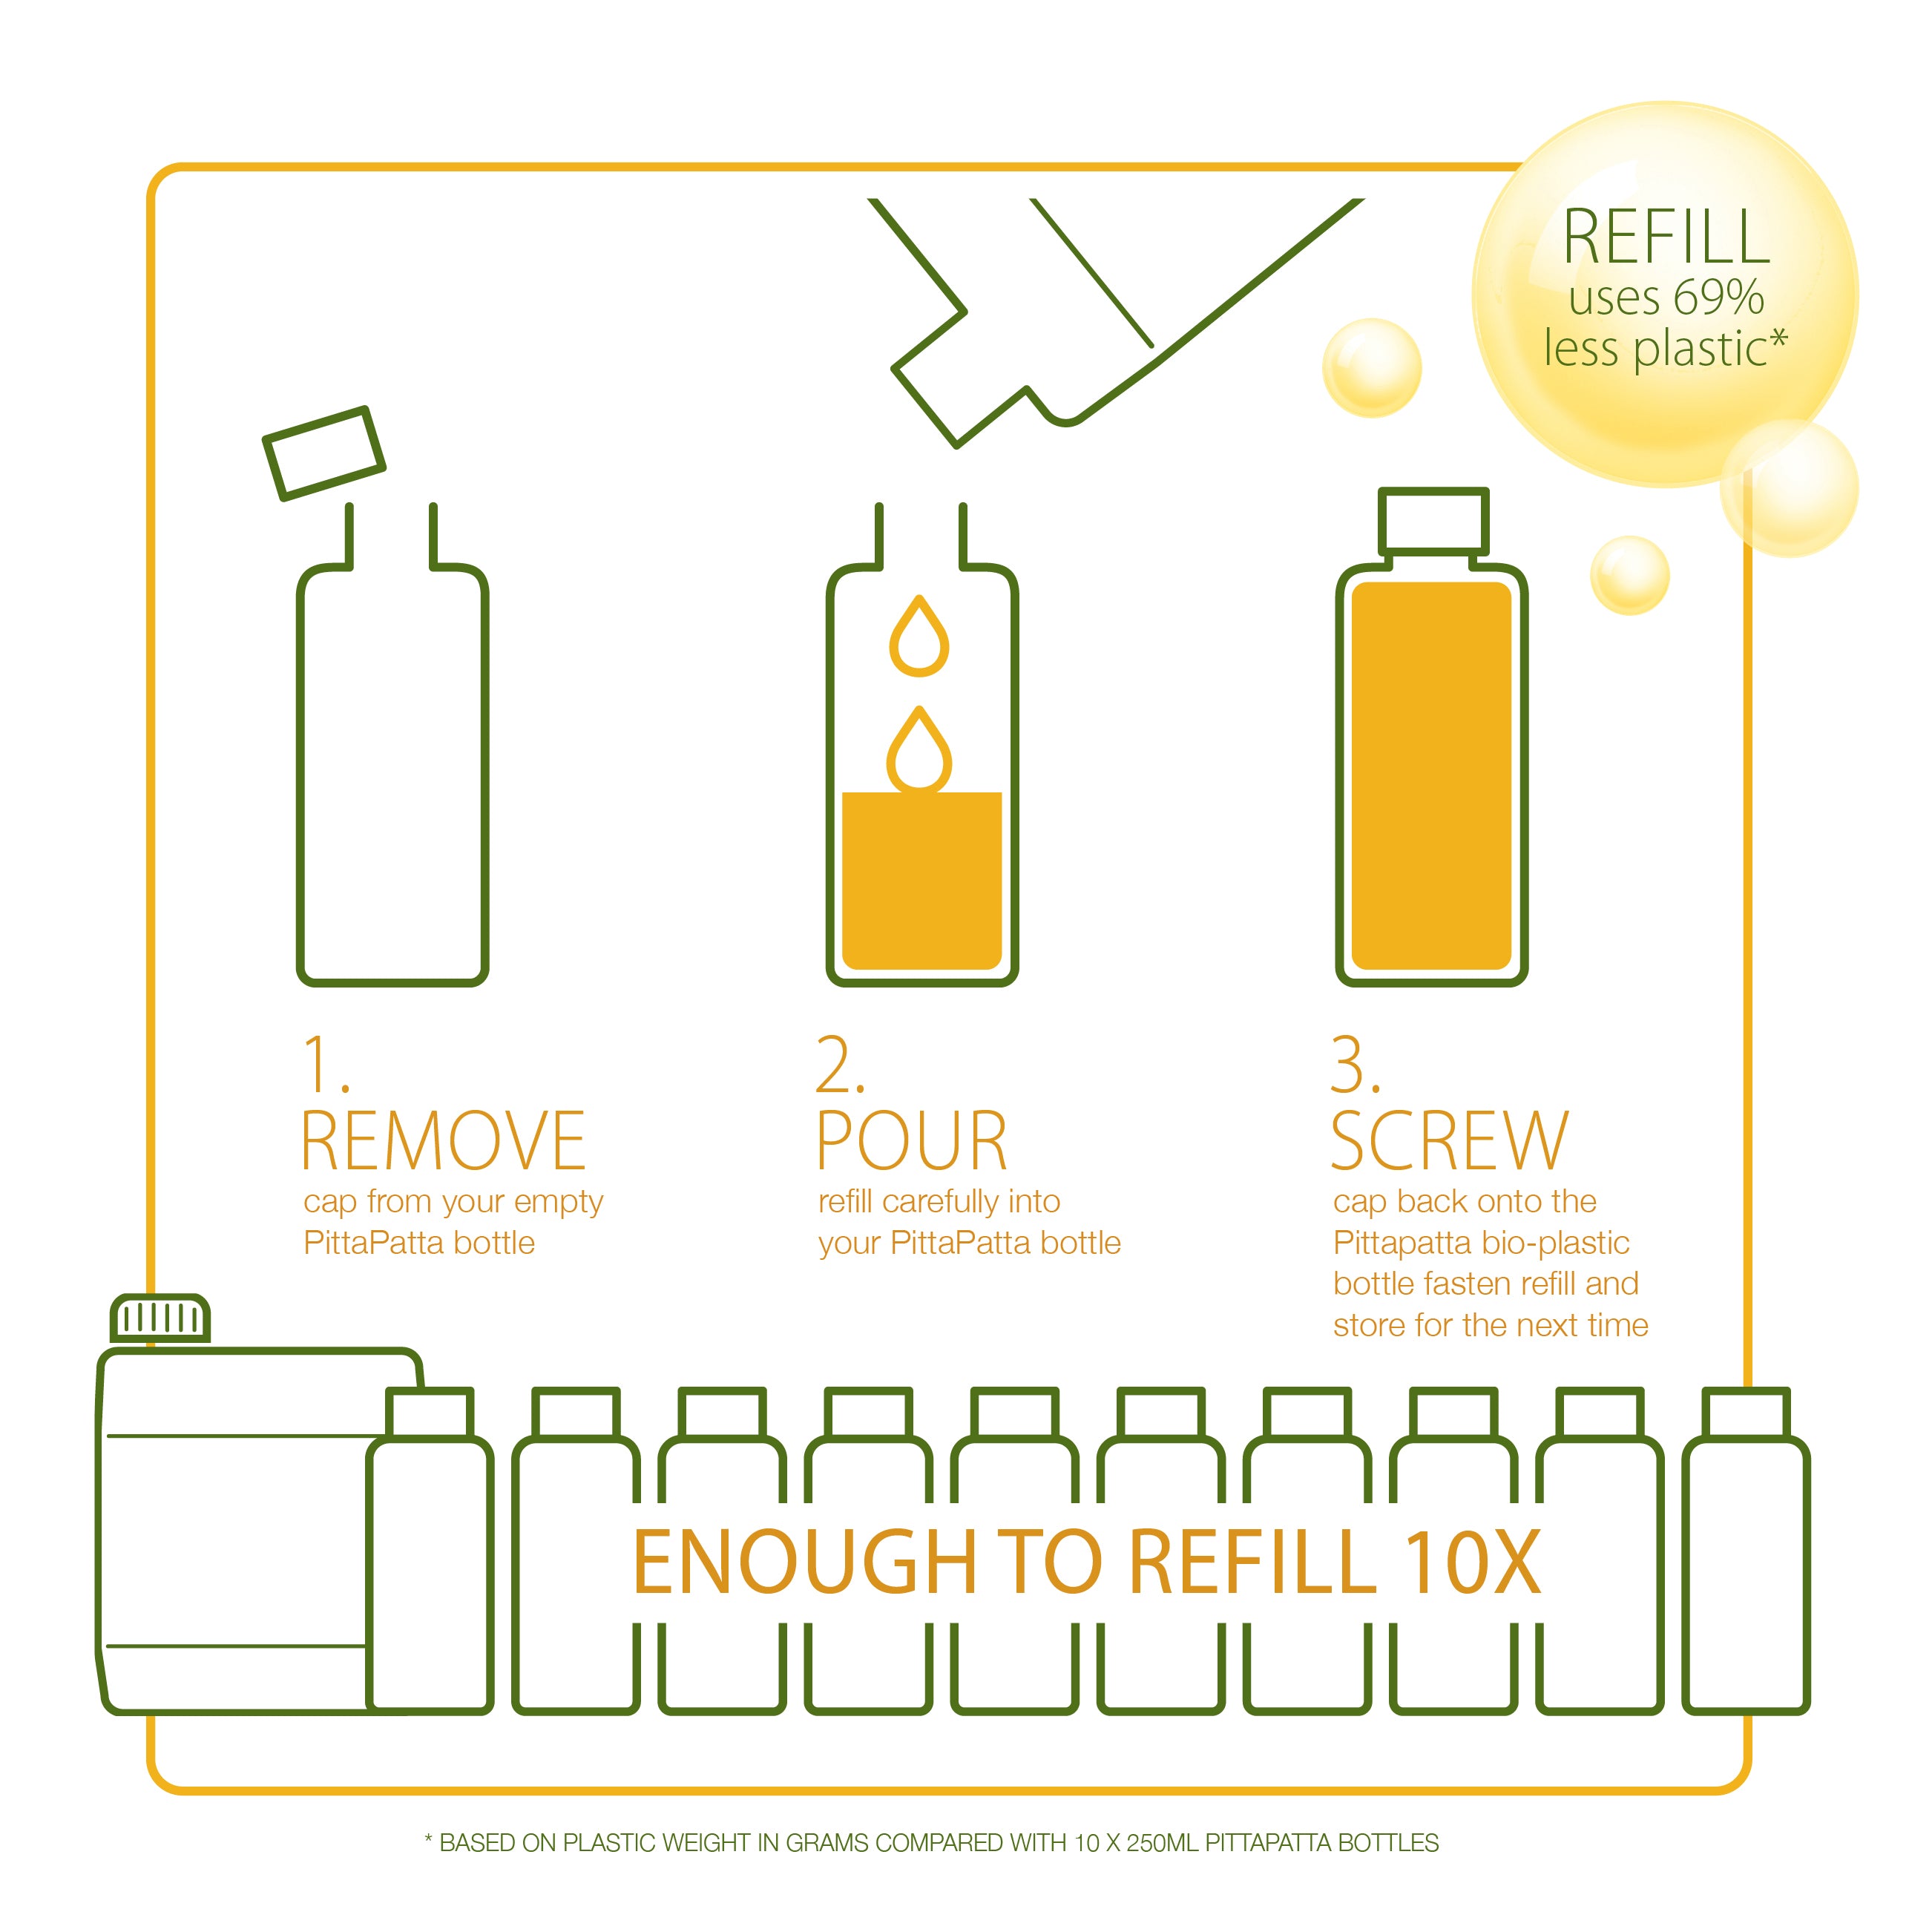 Reuse and refill, enough forl x10 Pittapatta bottles, never run out of your favourite product with our 2.5Lt refill. Uses 69% less plastic* * Based on plastic weight in grams compared with 10 x 250ml Pittapatta bottles